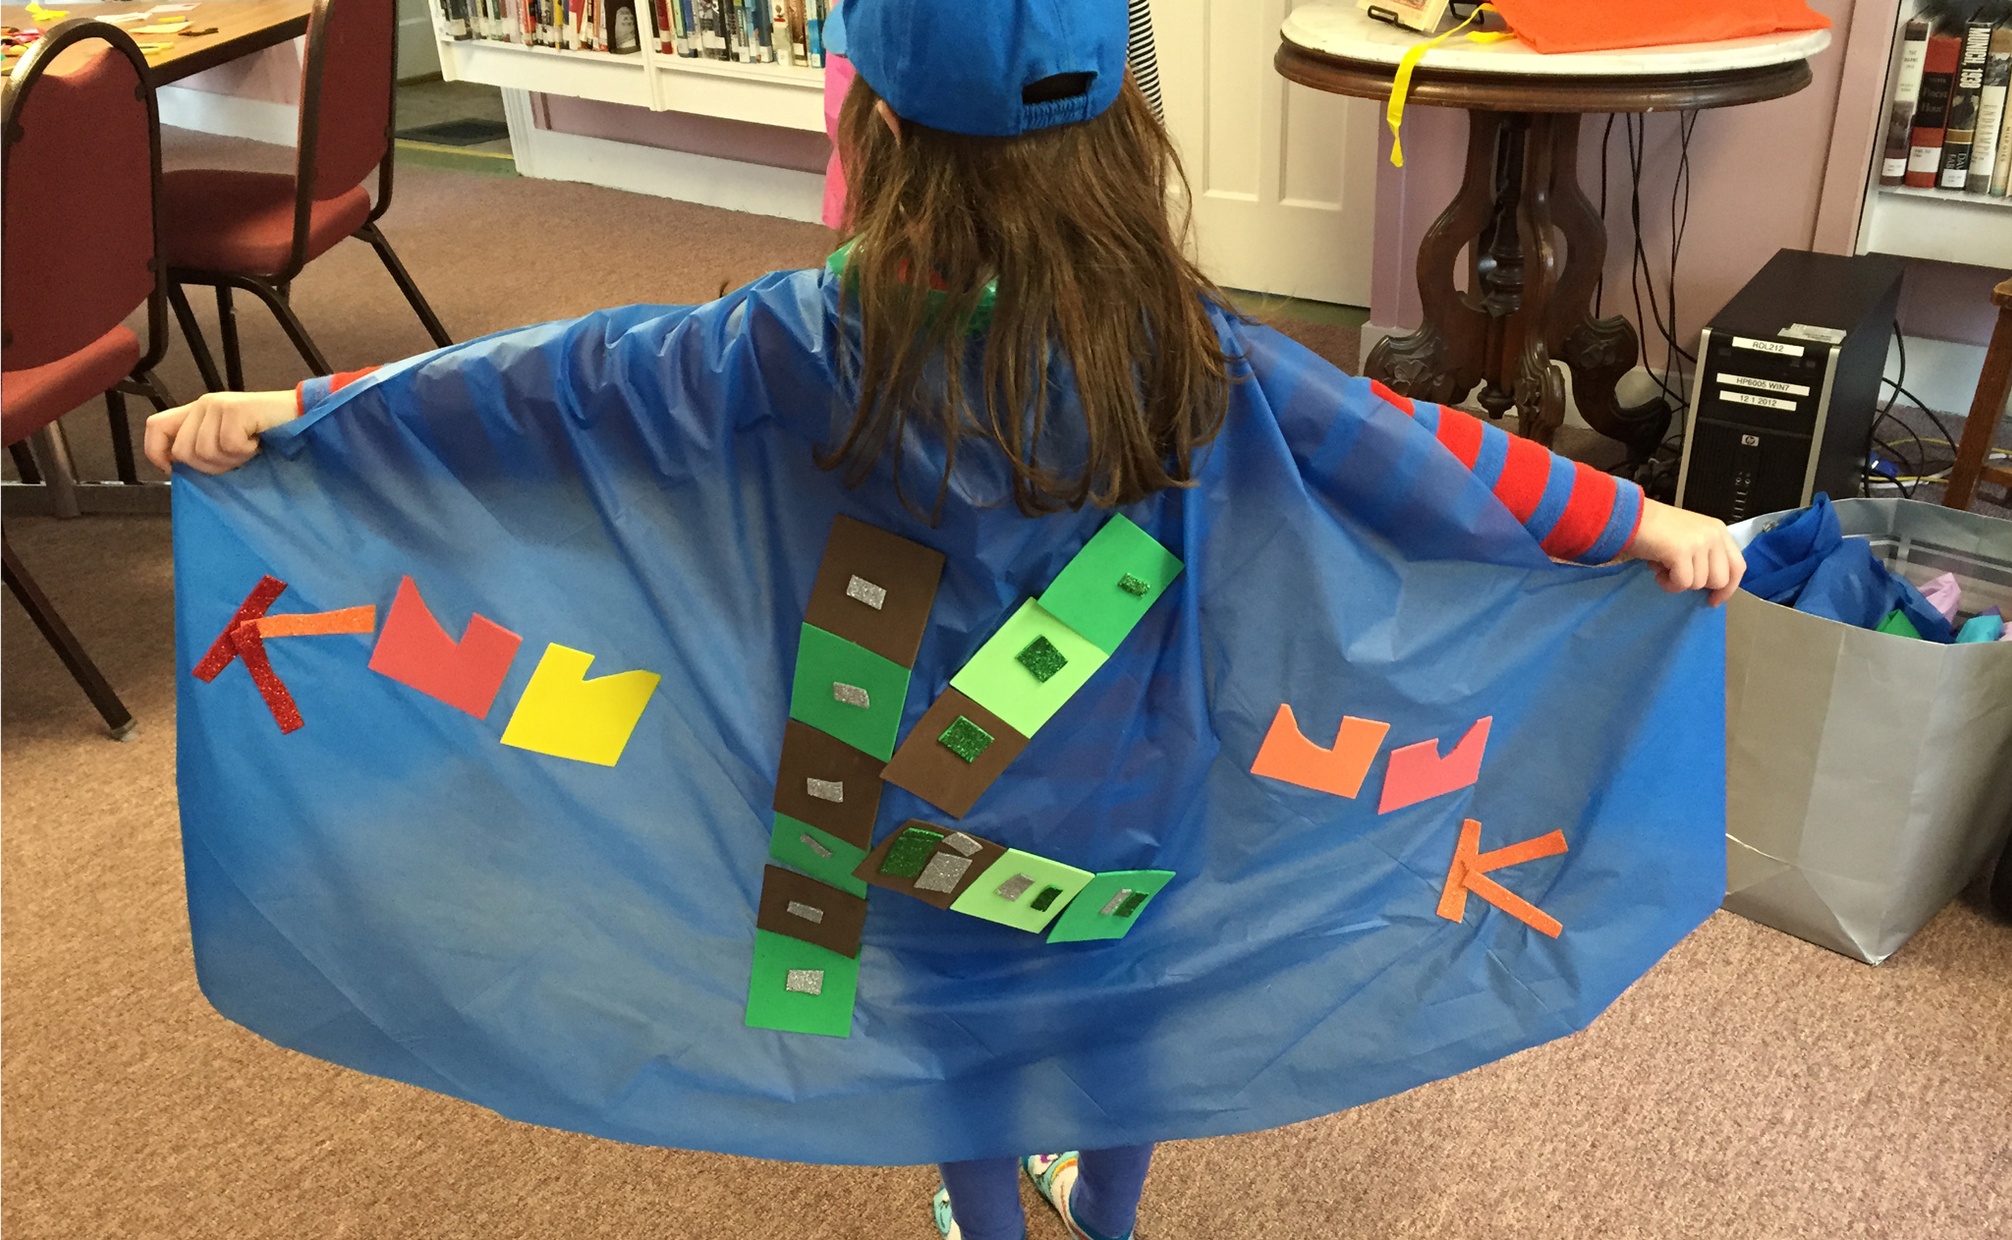 A young child, facing away from the camera, displays a blue cape with the letter K made from squares of colorful paper.